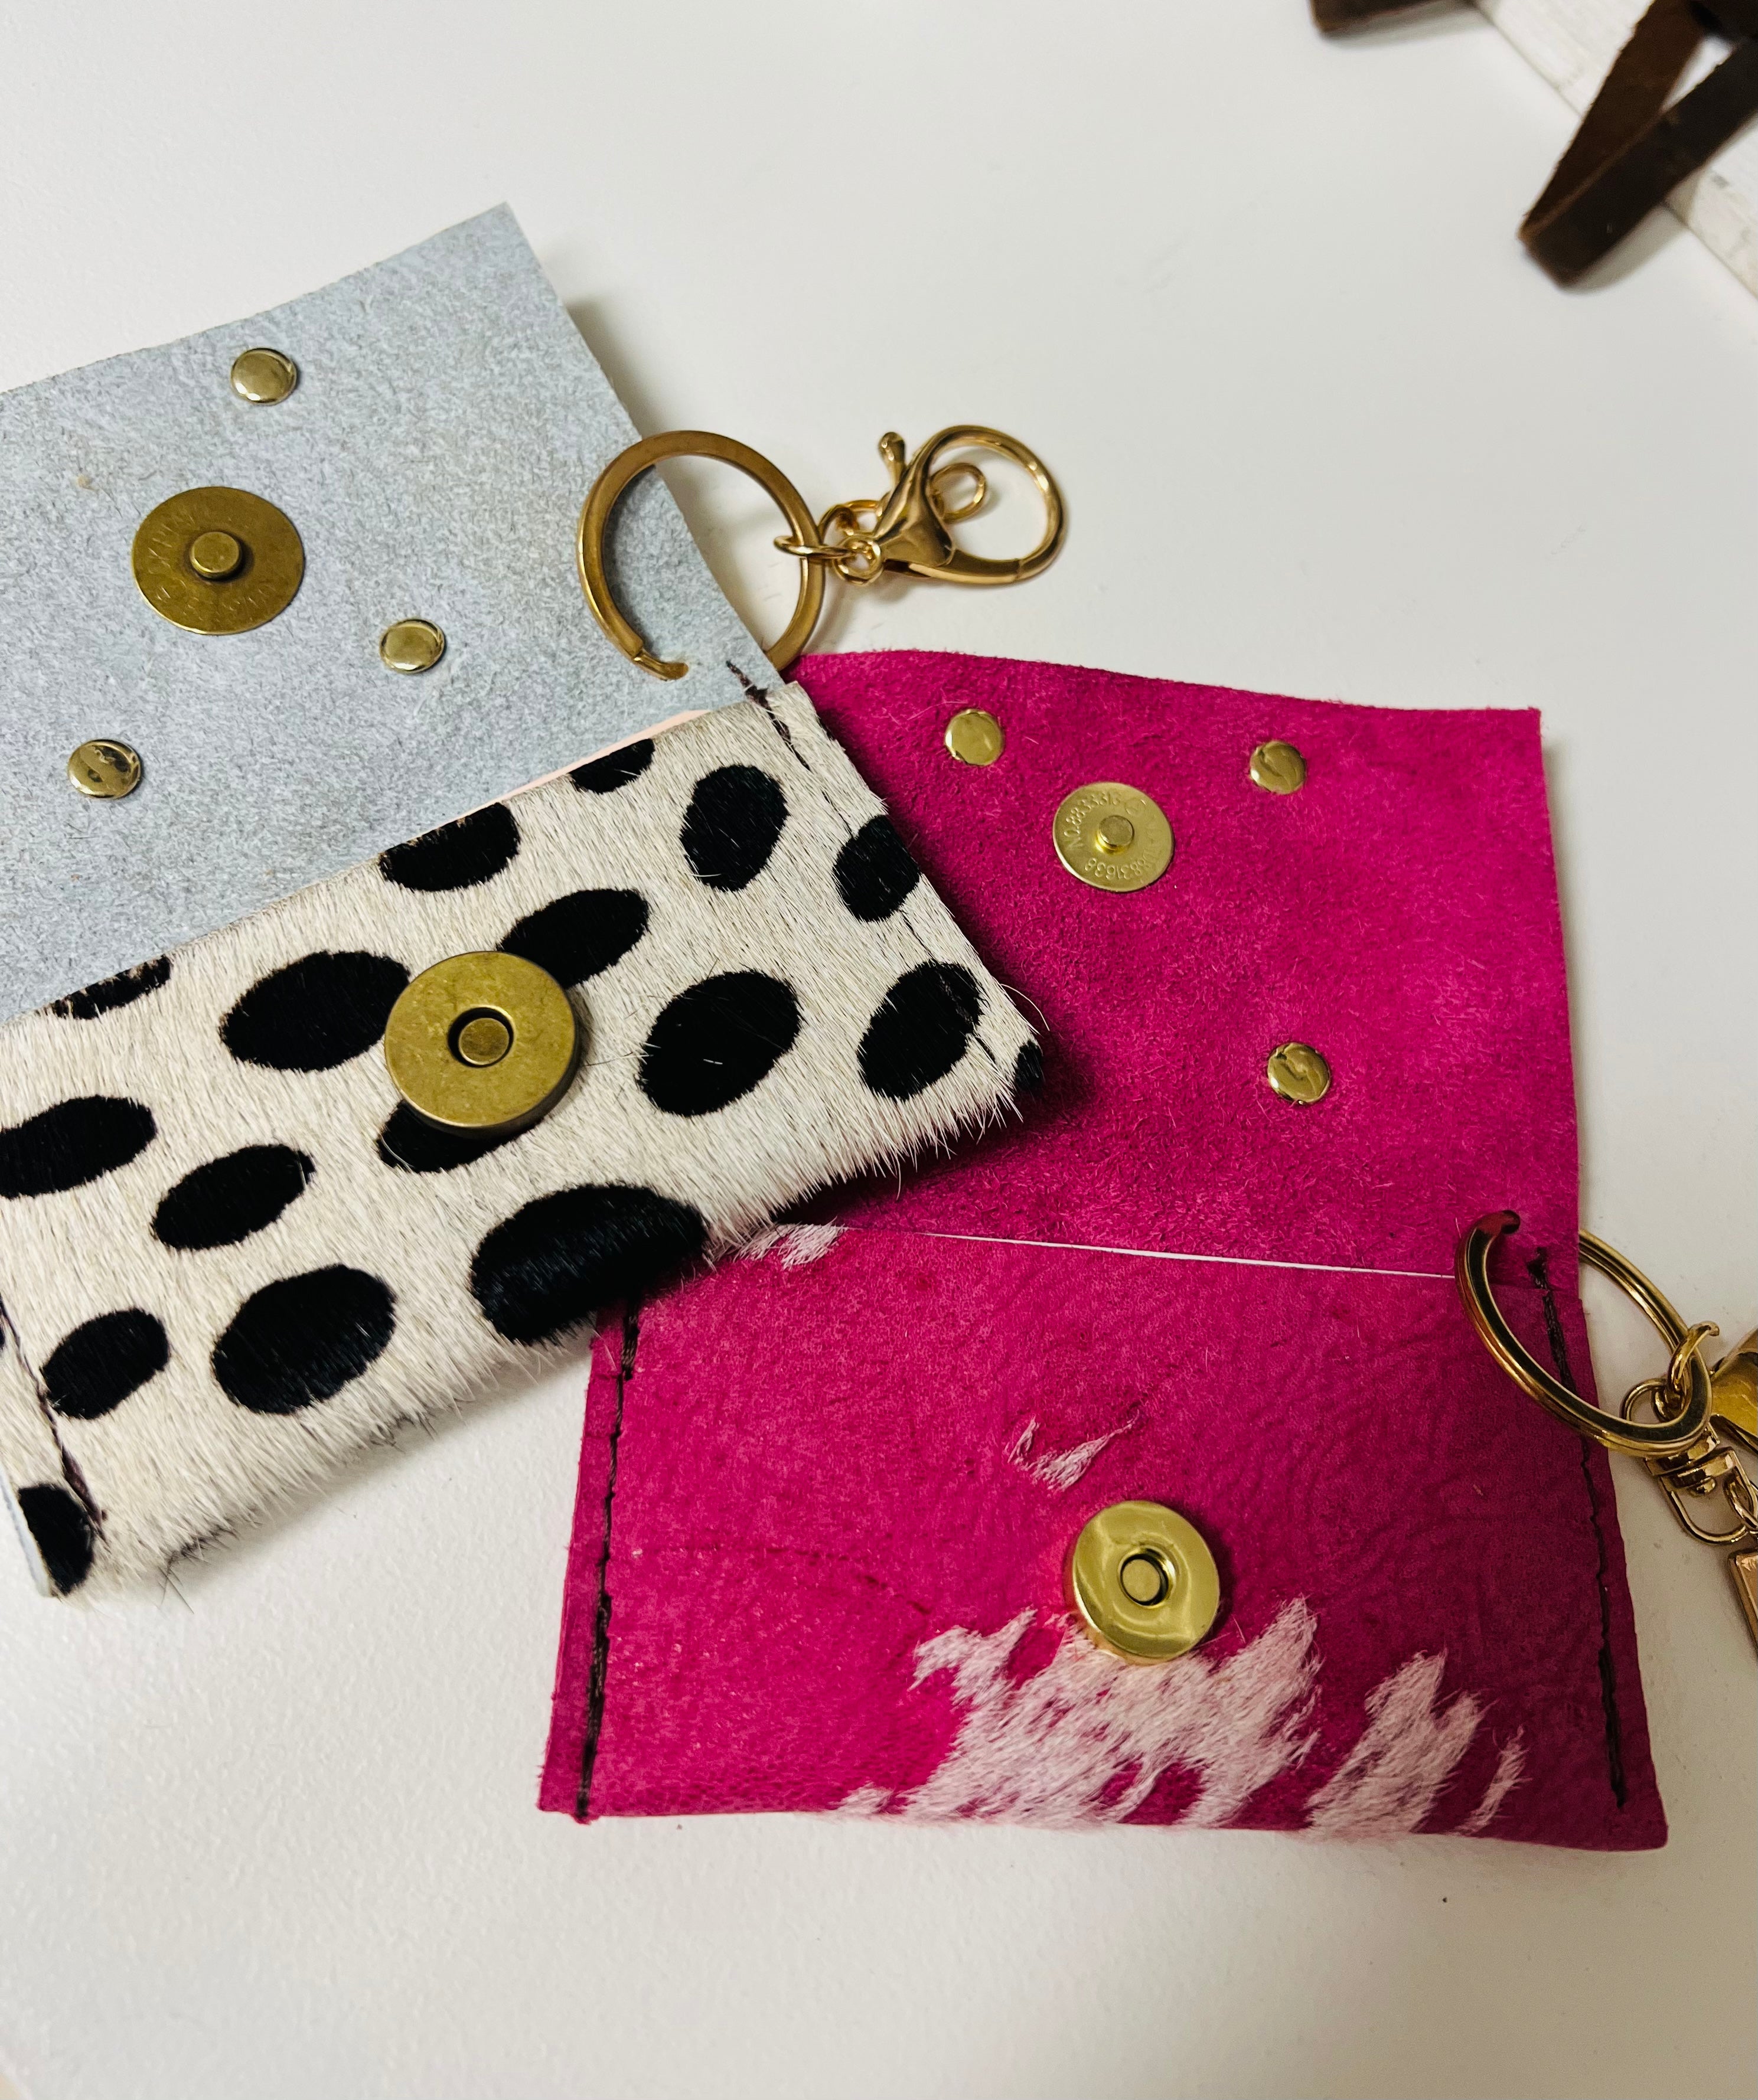 12 LV Upcycled Card Holder/Key Chain/Wallet ideas